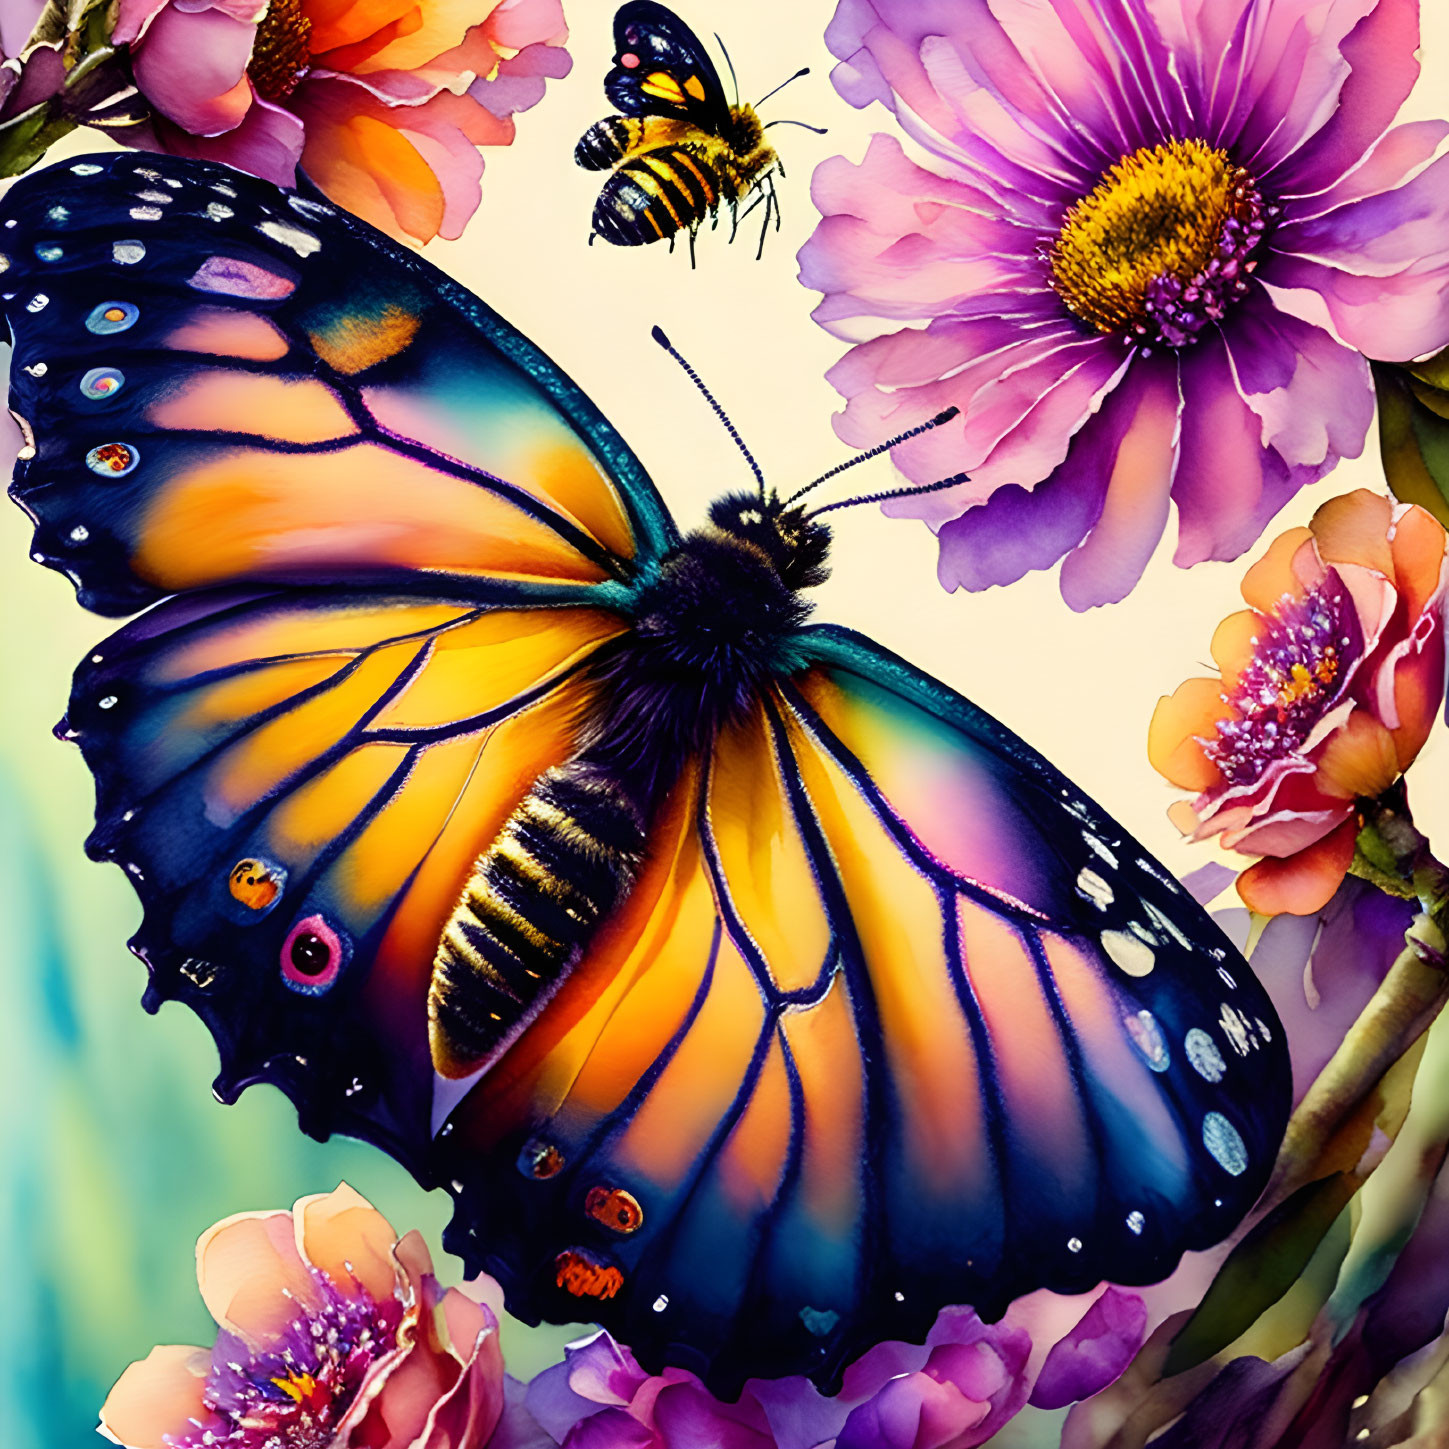 Colorful Butterfly and Bee Among Pink Flowers on Blue Background